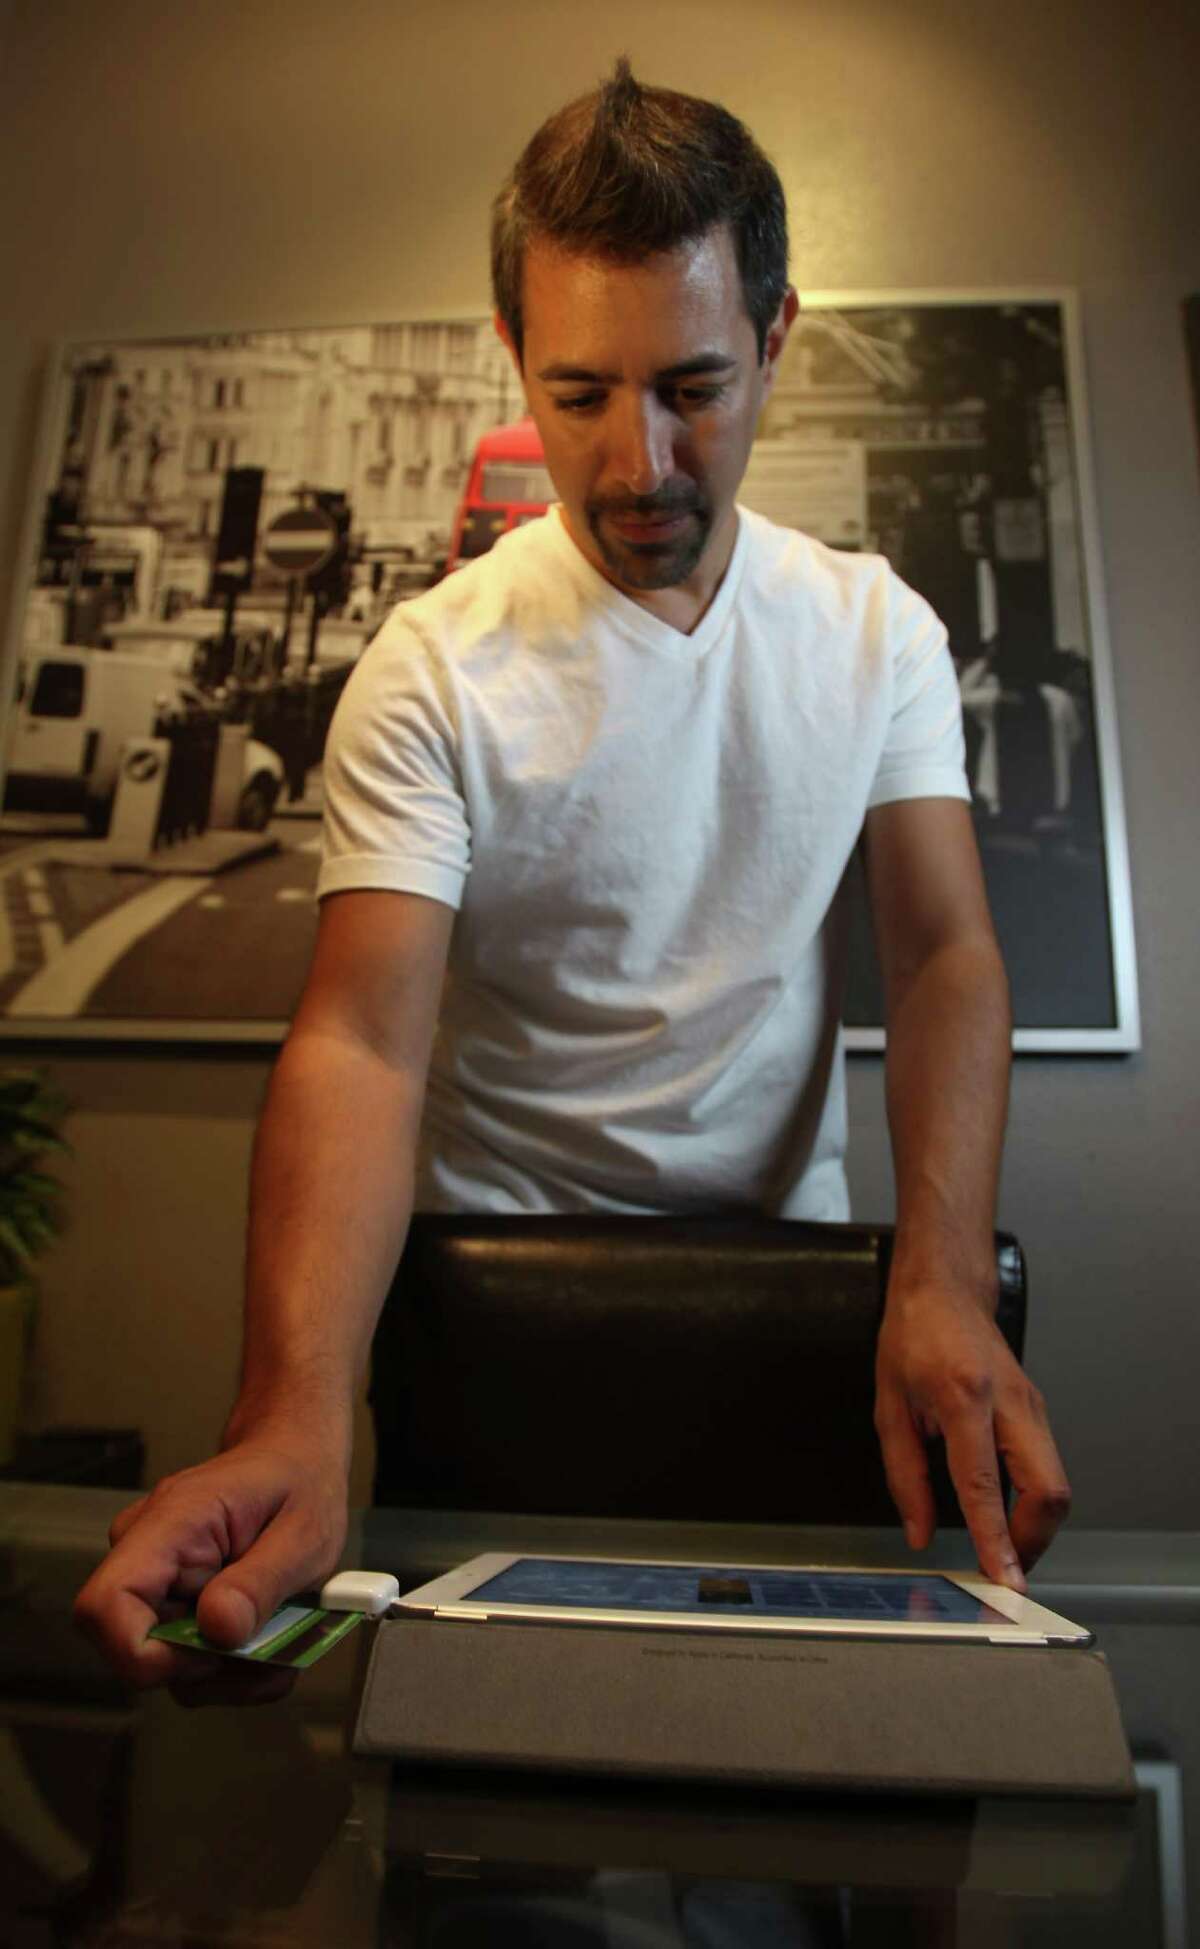 Joey Garza, owner of Urban Therapy, in the Heights, swipes a client's credit card using a Square on his iPad, Monday, Aug. 20, 2012, in Houston. ( Karen Warren / Houston Chronicle )